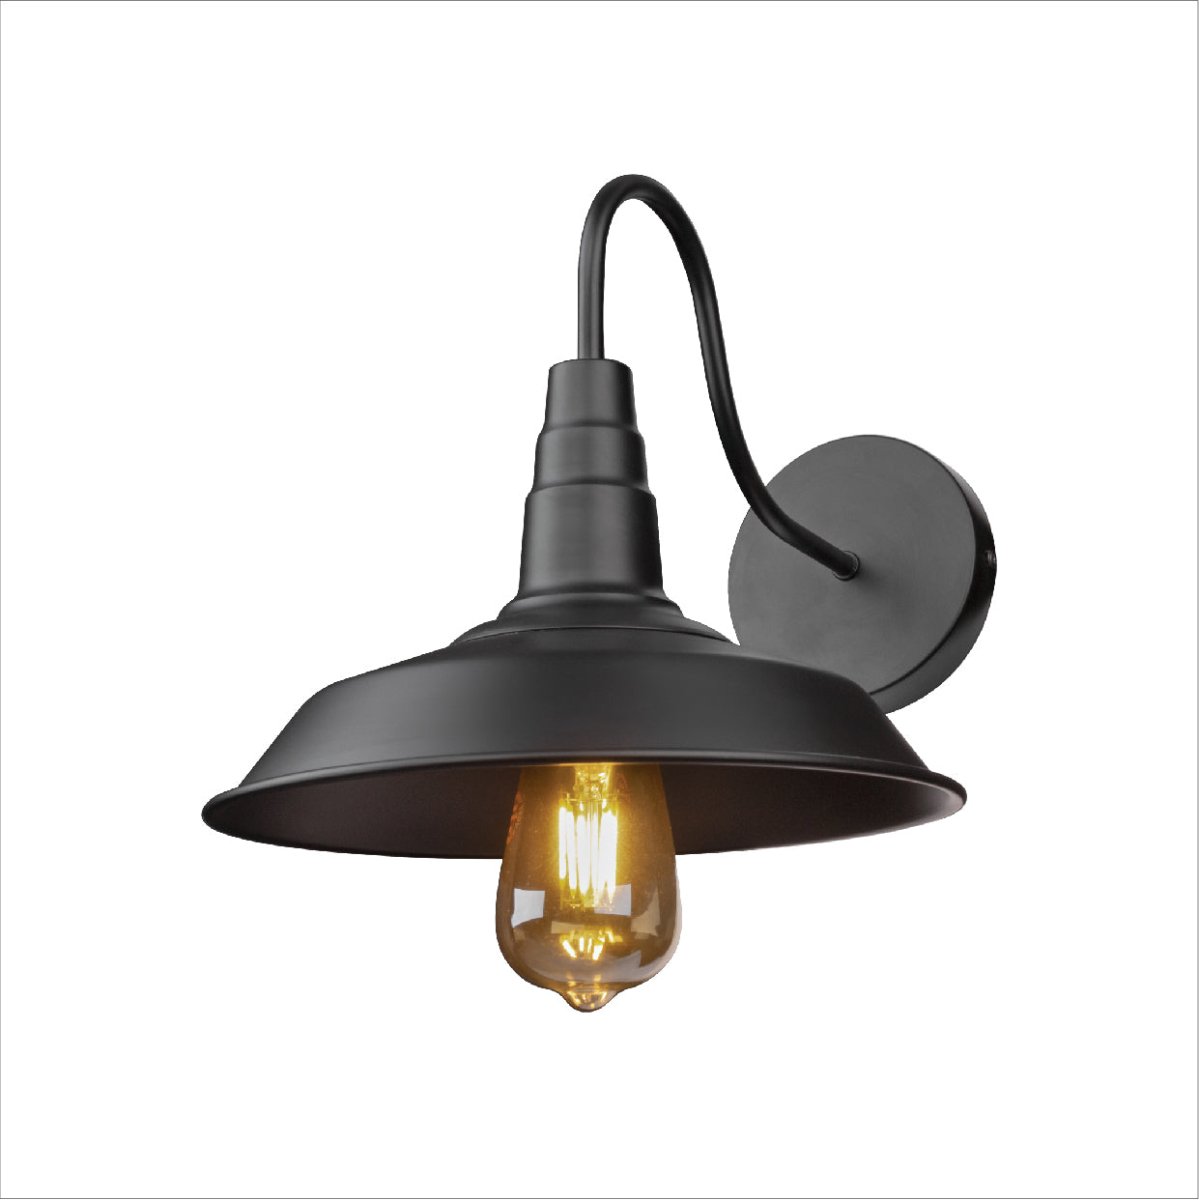 Main image of Black Swan Step Metal Industrial Retro Wall Light with E27 Fitting | TEKLED 151-19608